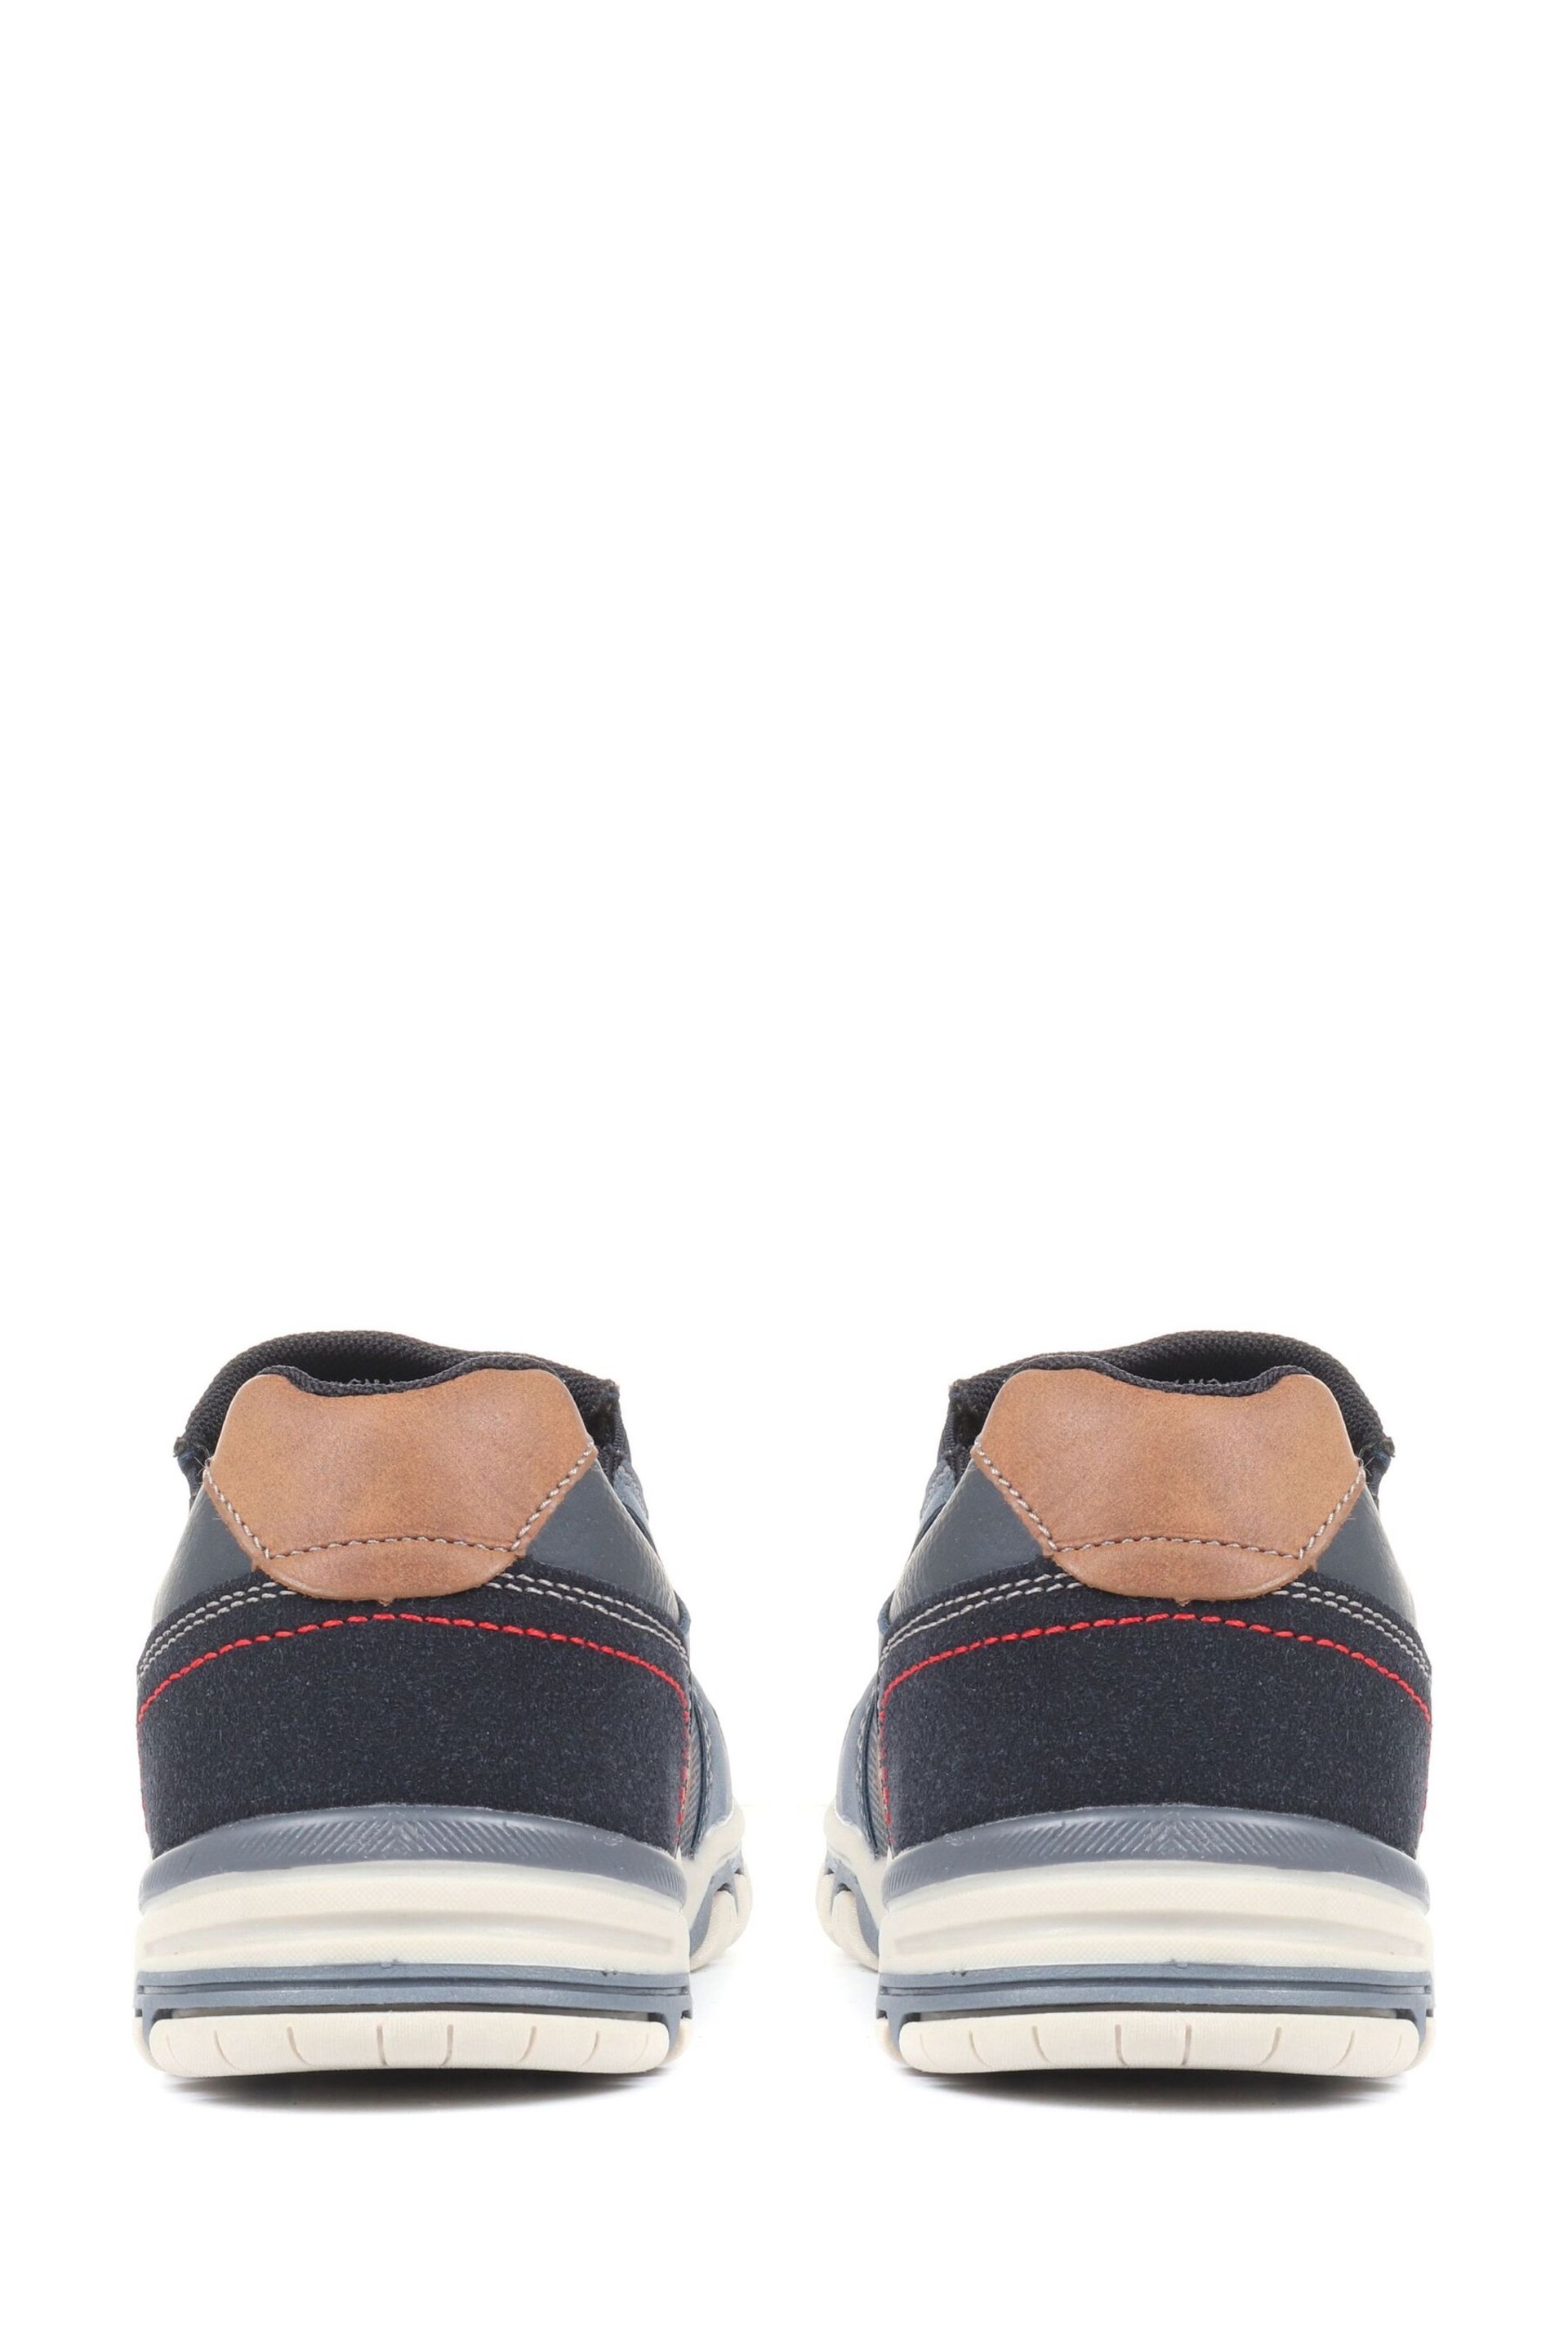 Pavers Wide Fit Mens Slip-On Trainers - Image 2 of 5